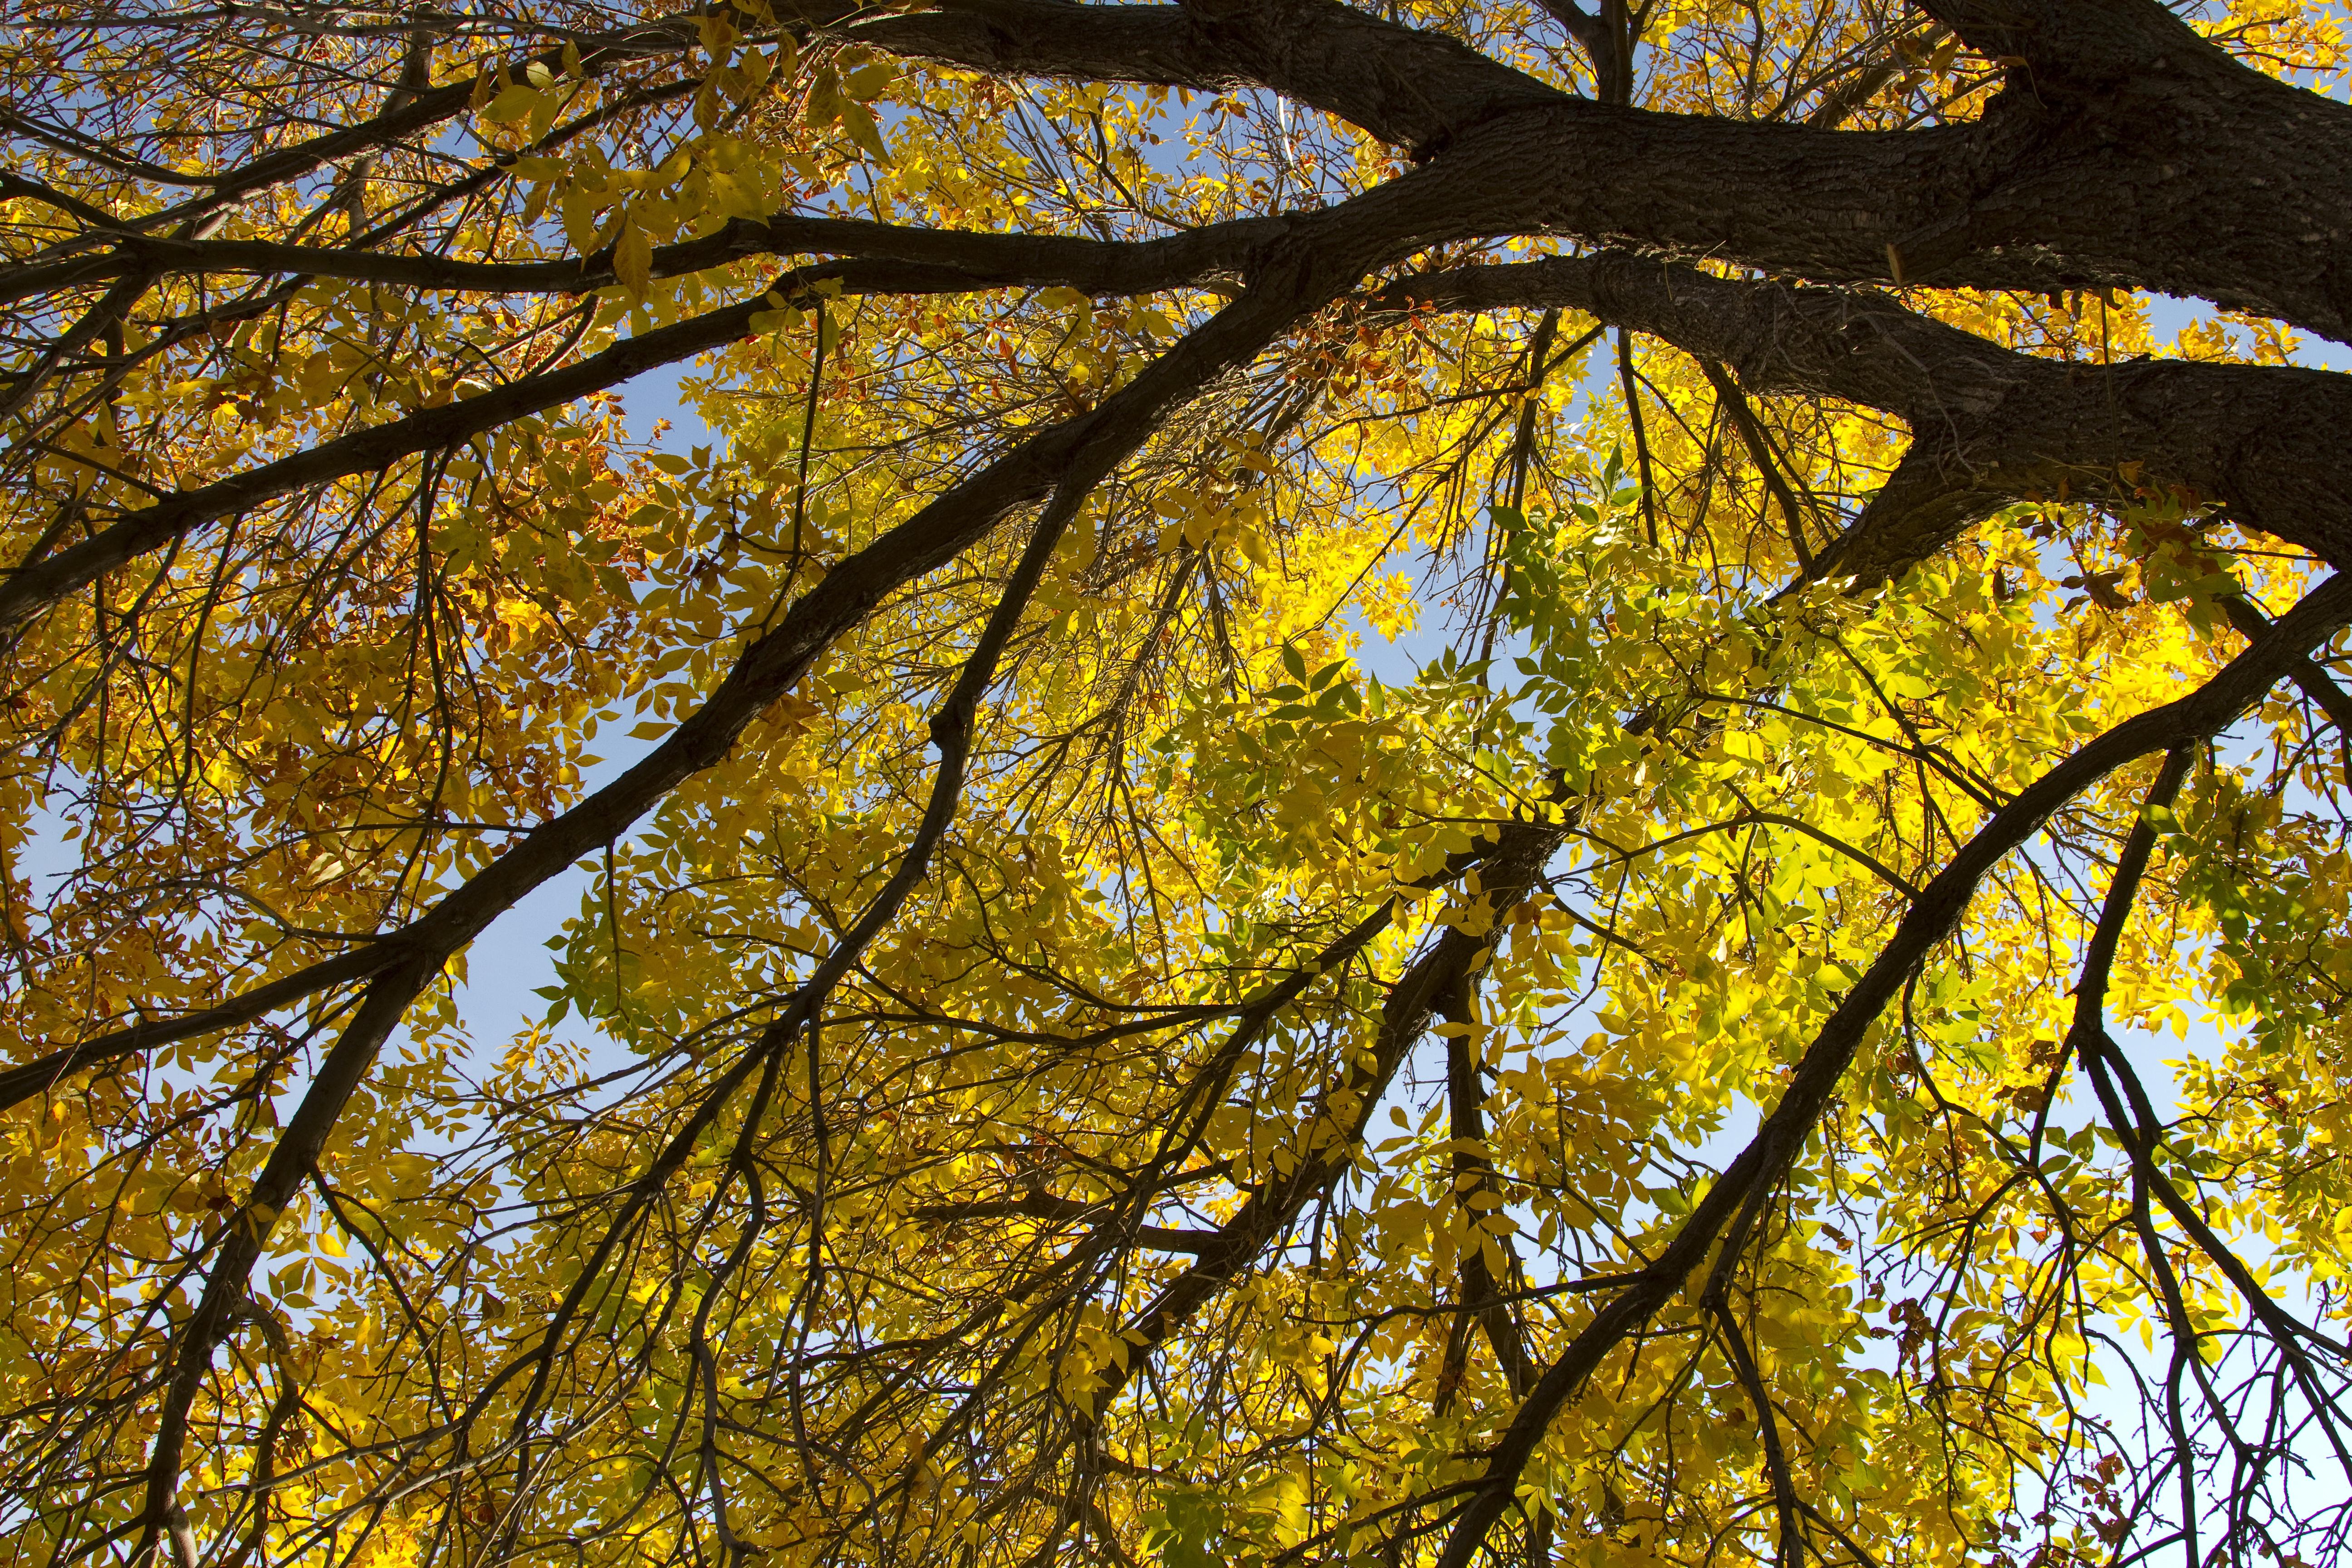 Photo of tree leaves turning color in autumn.